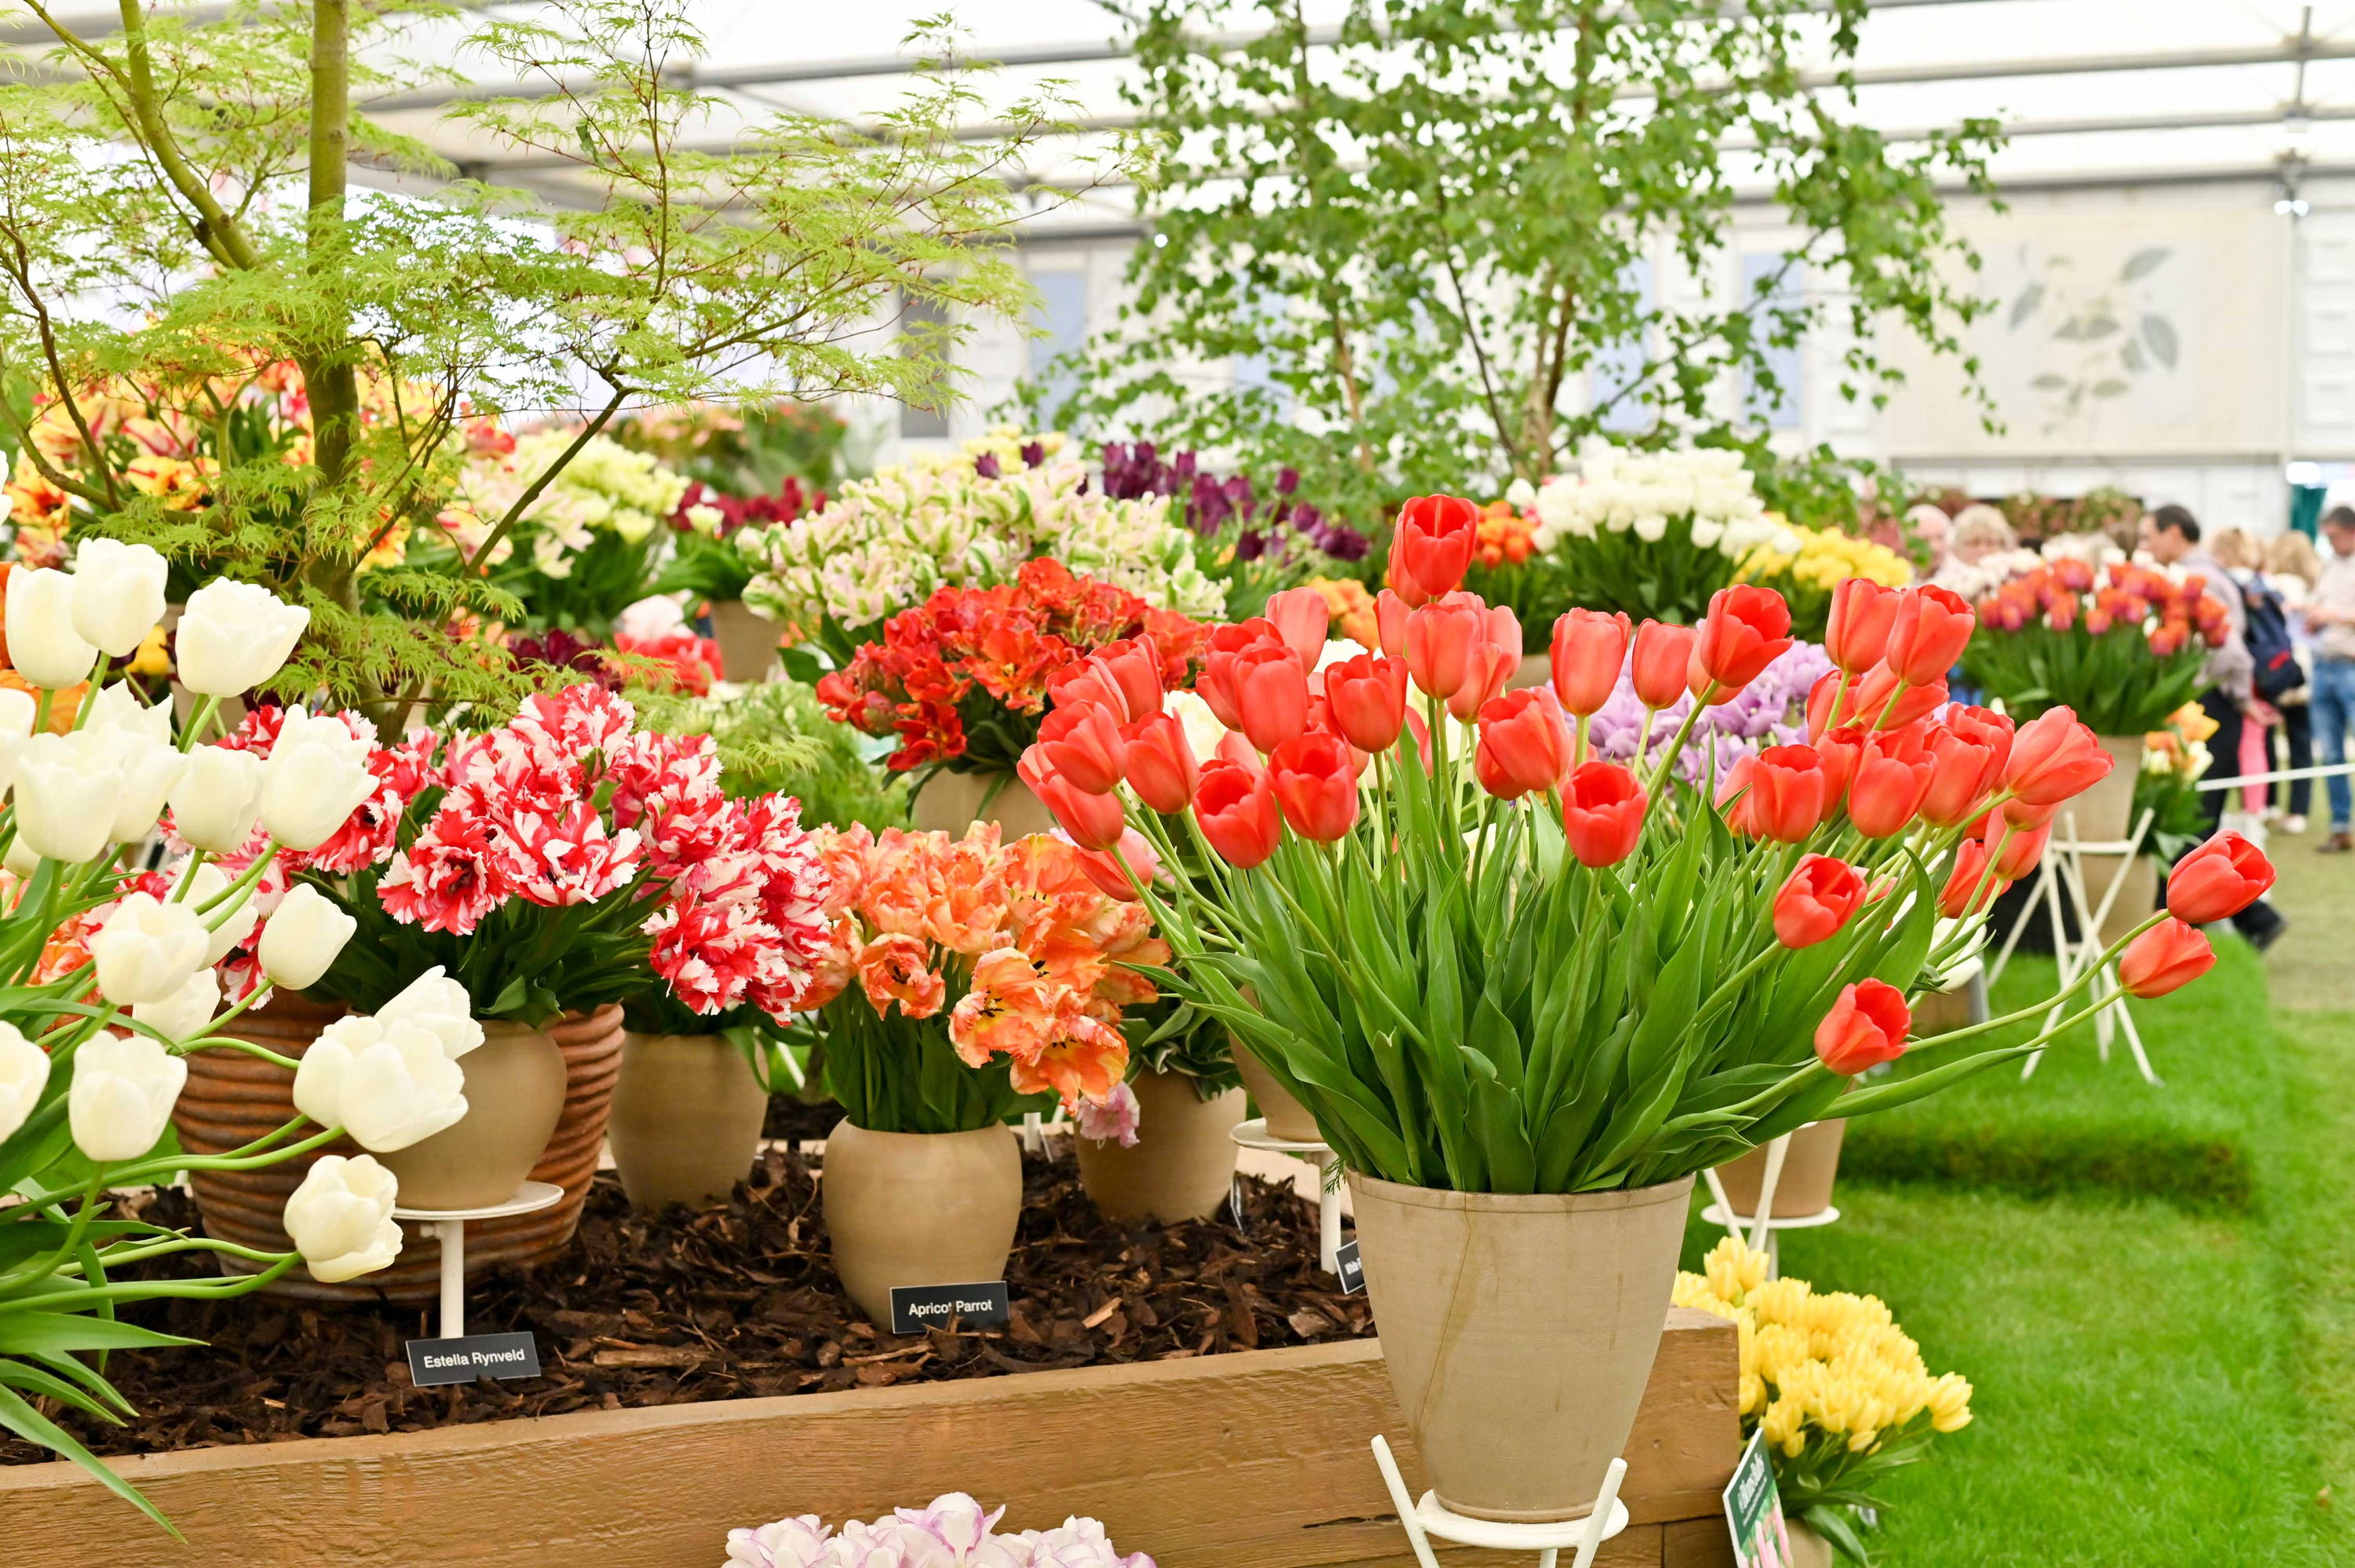 Tulips at the 2019 Chelsea Flower Show